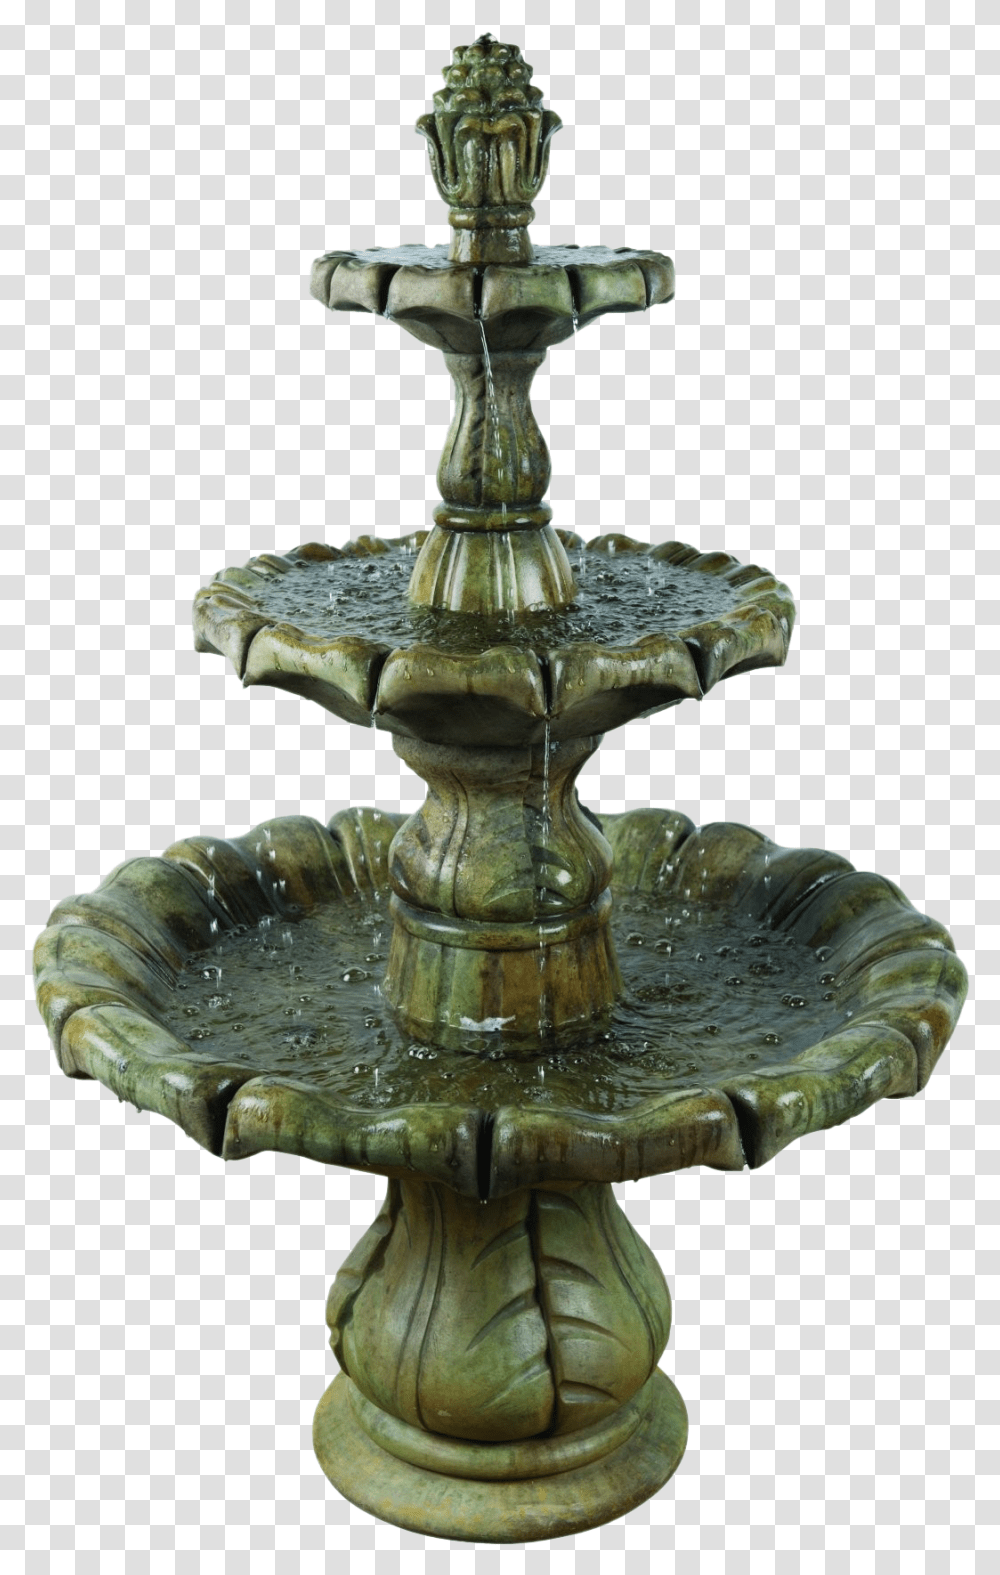 Fountain Background Fountain, Water, Cross, Fire Hydrant Transparent Png